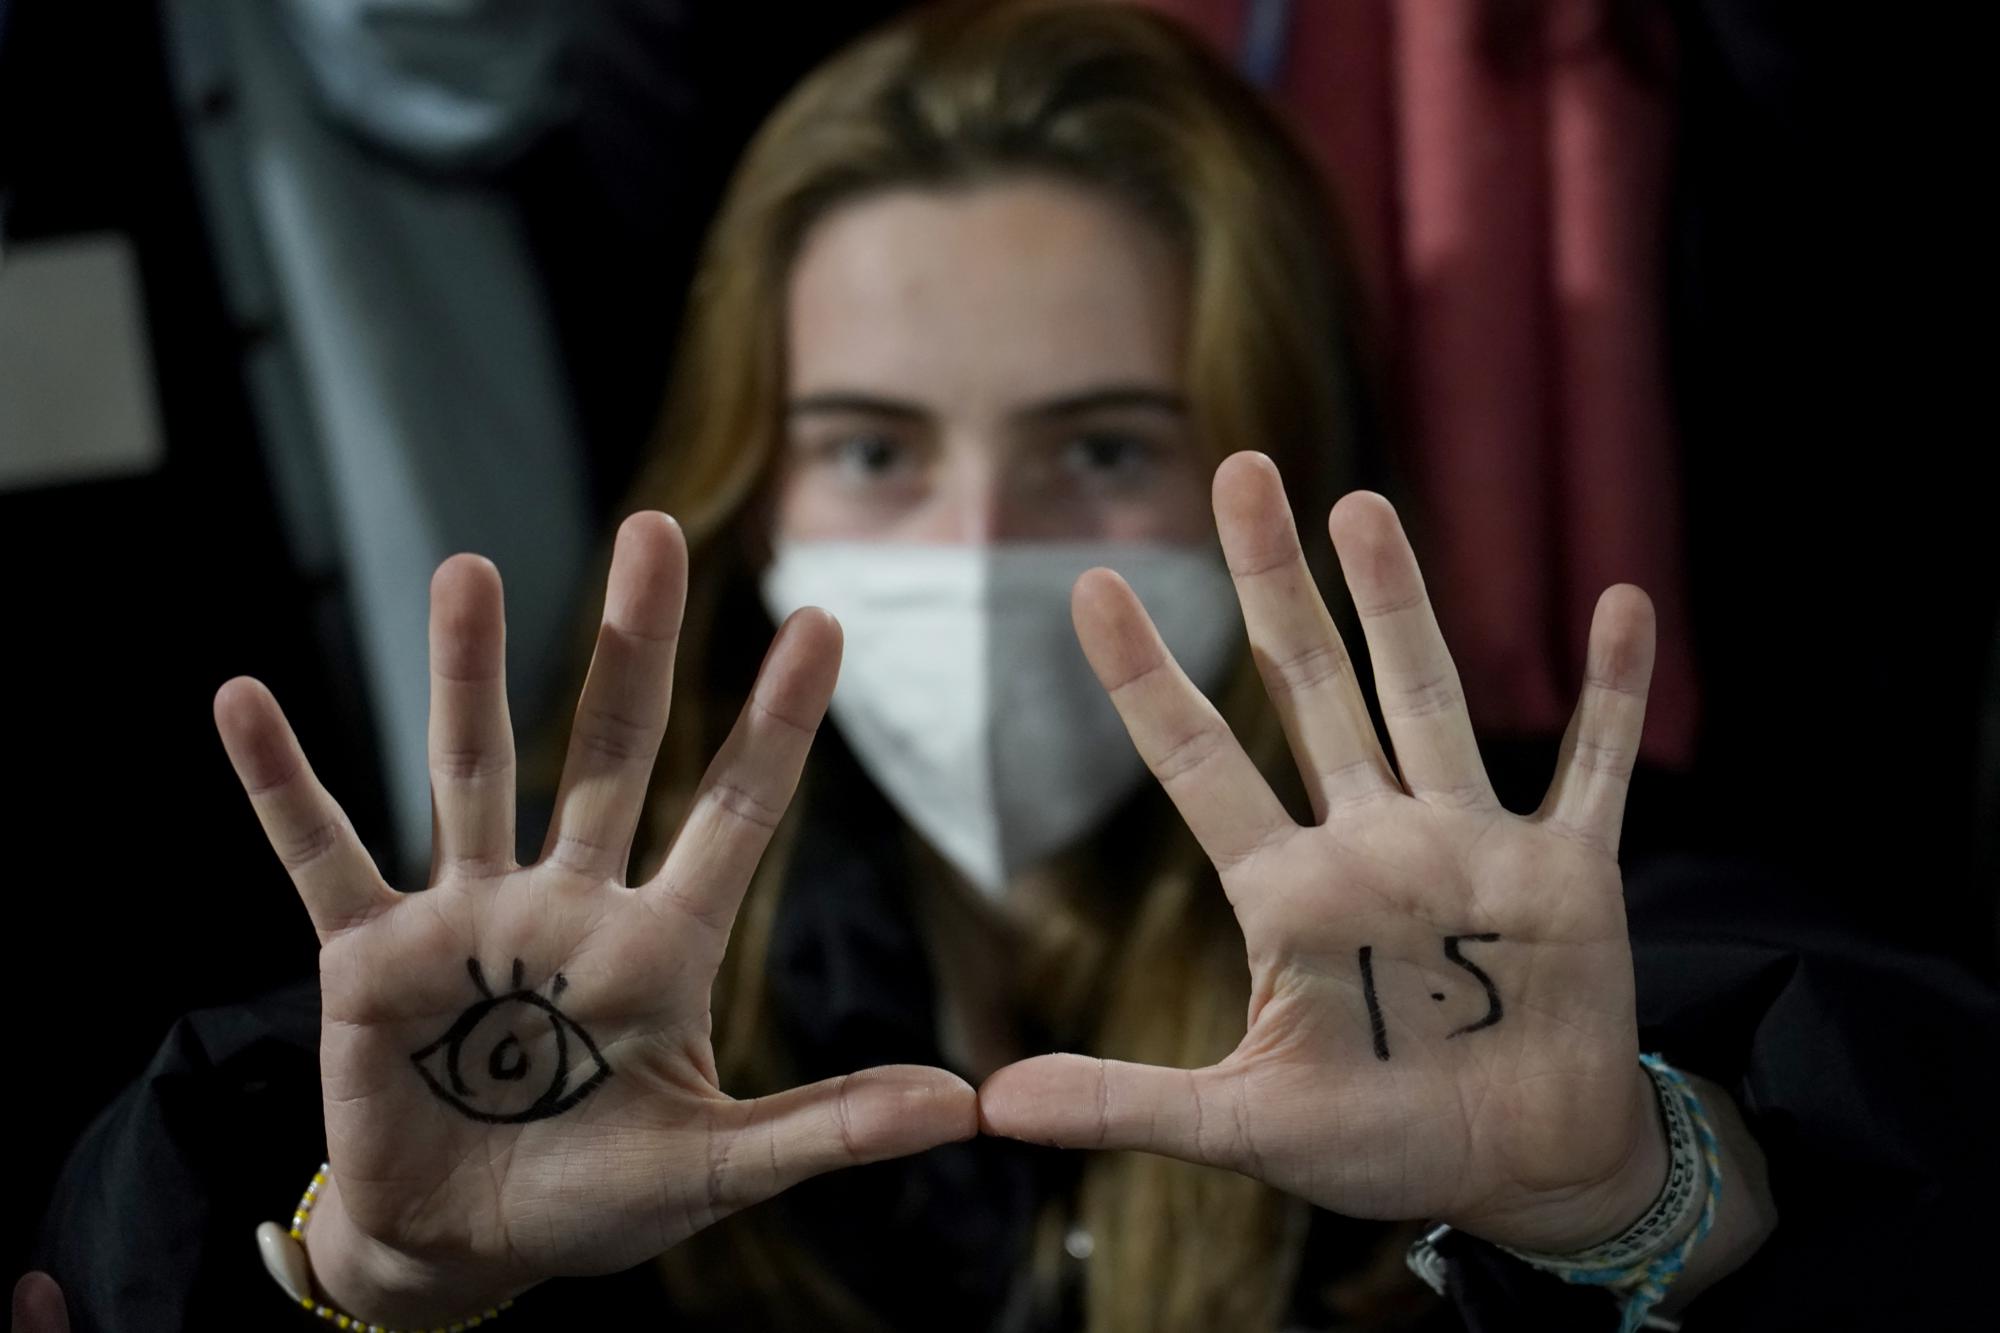 FILE - A youngster, with an eye drawn on her hand to show she is watching and 1.5 for countries to keep warming below 1.5 degrees Celsius, takes part in a Fridays for Future climate protest inside a plenary corridor at the SEC (Scottish Event Campus) venue for the COP26 U.N. Climate Summit, in Glasgow, Scotland, Wednesday, Nov. 10, 2021. The United Nations on Monday, Feb. 28, 2022, released a new report on climate change. (AP Photo/Alberto Pezzali, File)